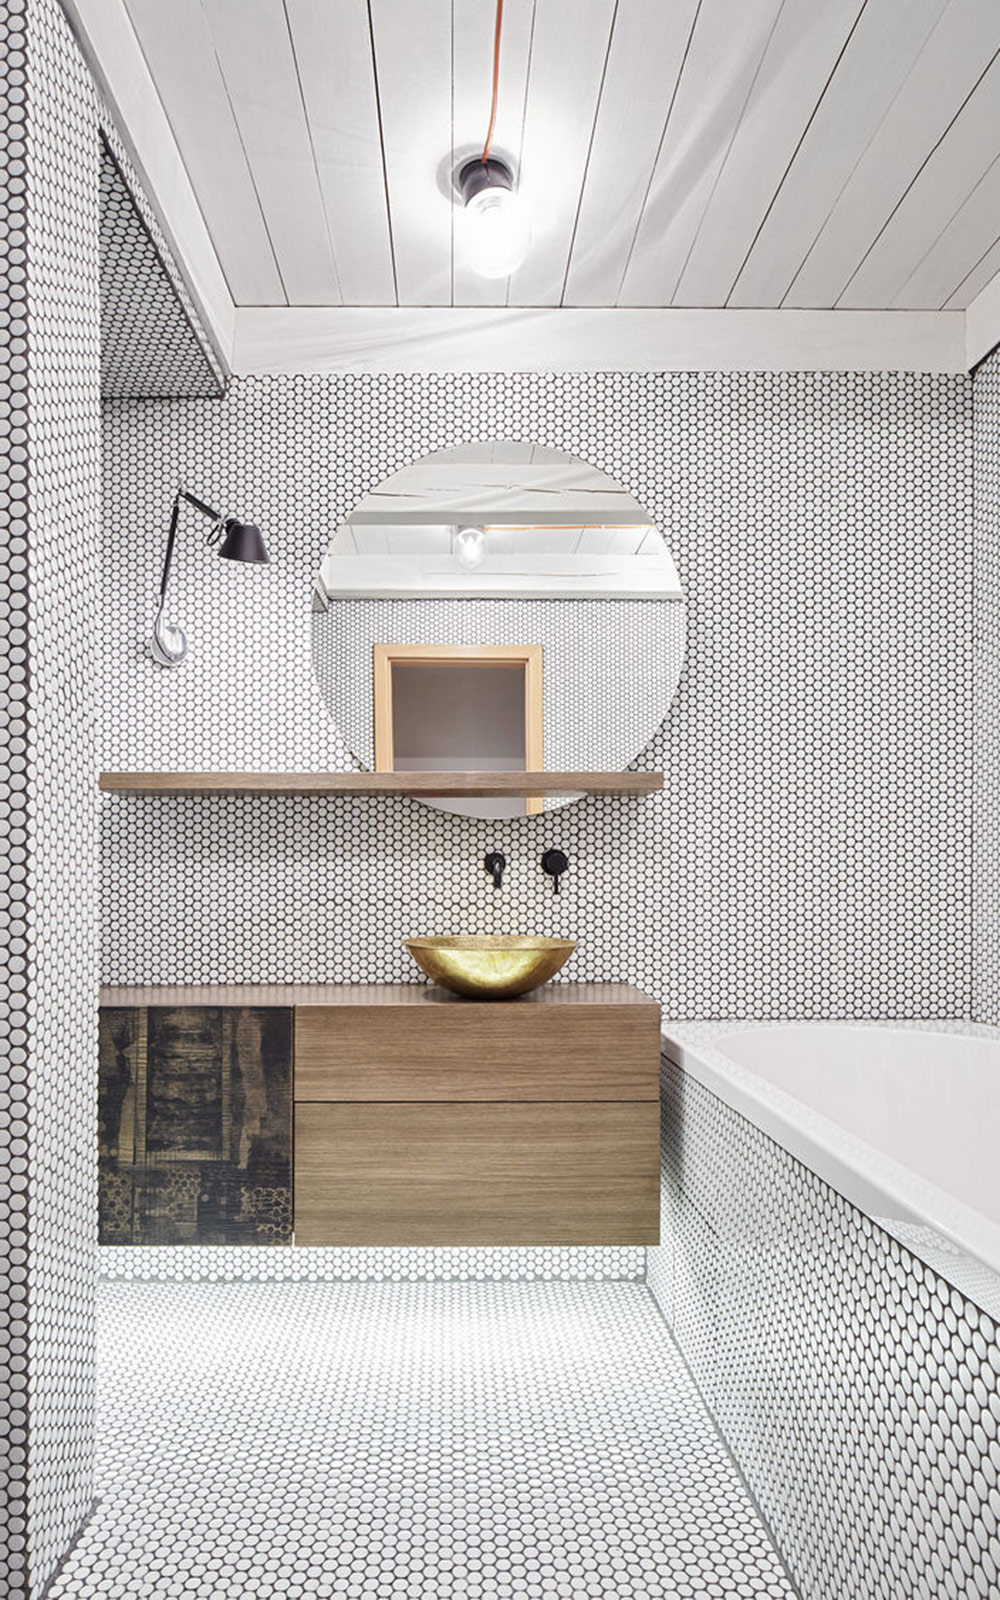 Circle tiled bathroom with gold basin and wooden ceiling